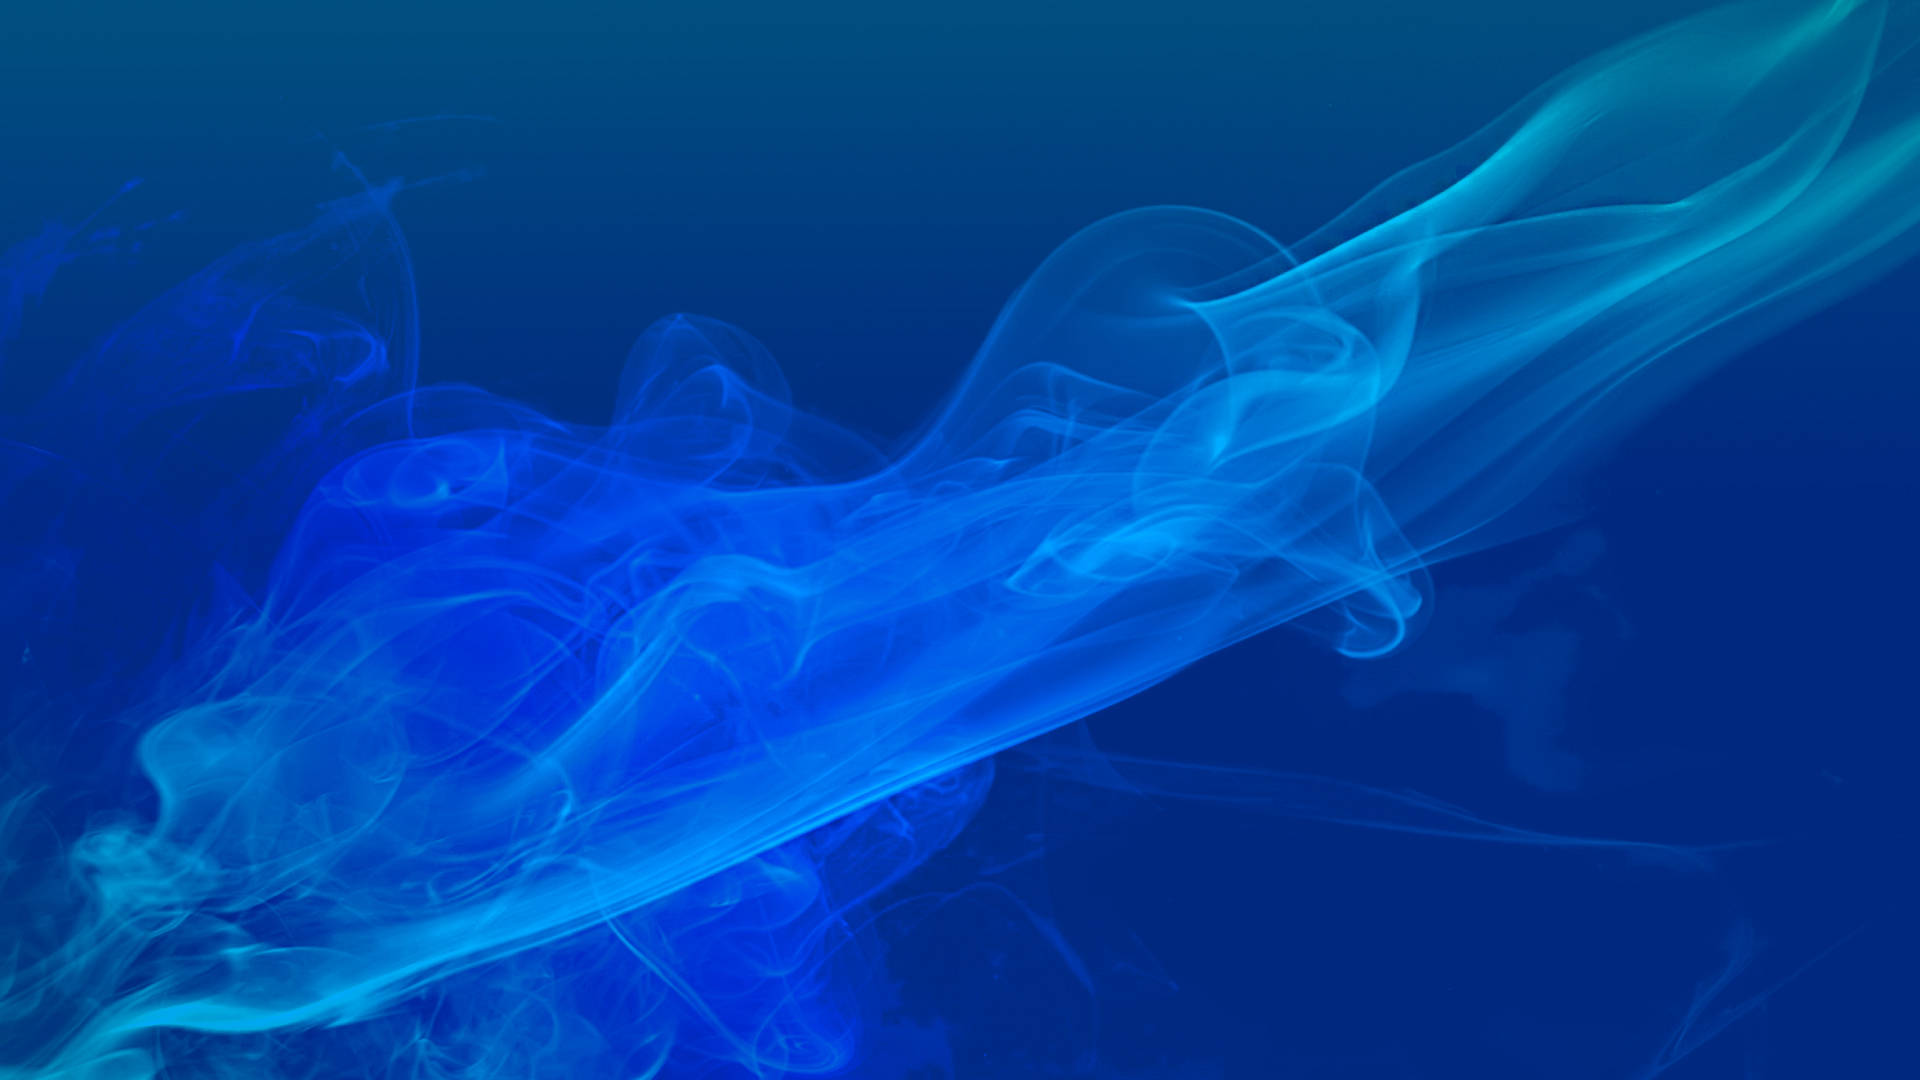 Bright Blue Abstract Smoke Hd Background